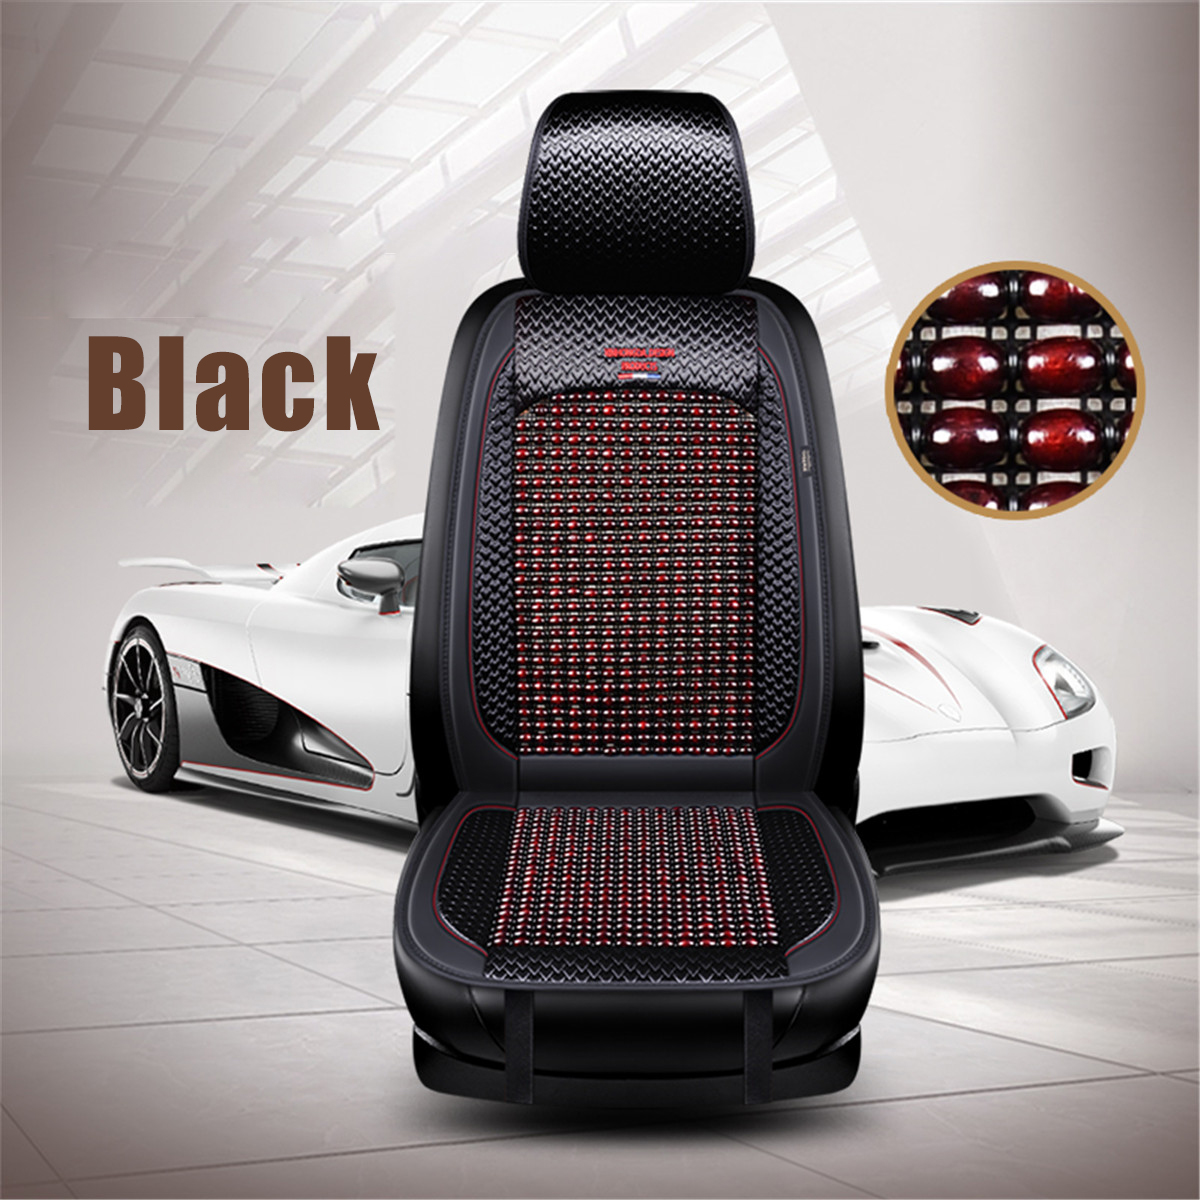 1Pcs Breathable Auto Car Seat Cover Vehicle Wooden Bamboo Cushion Pad Summer - Auto GoShop